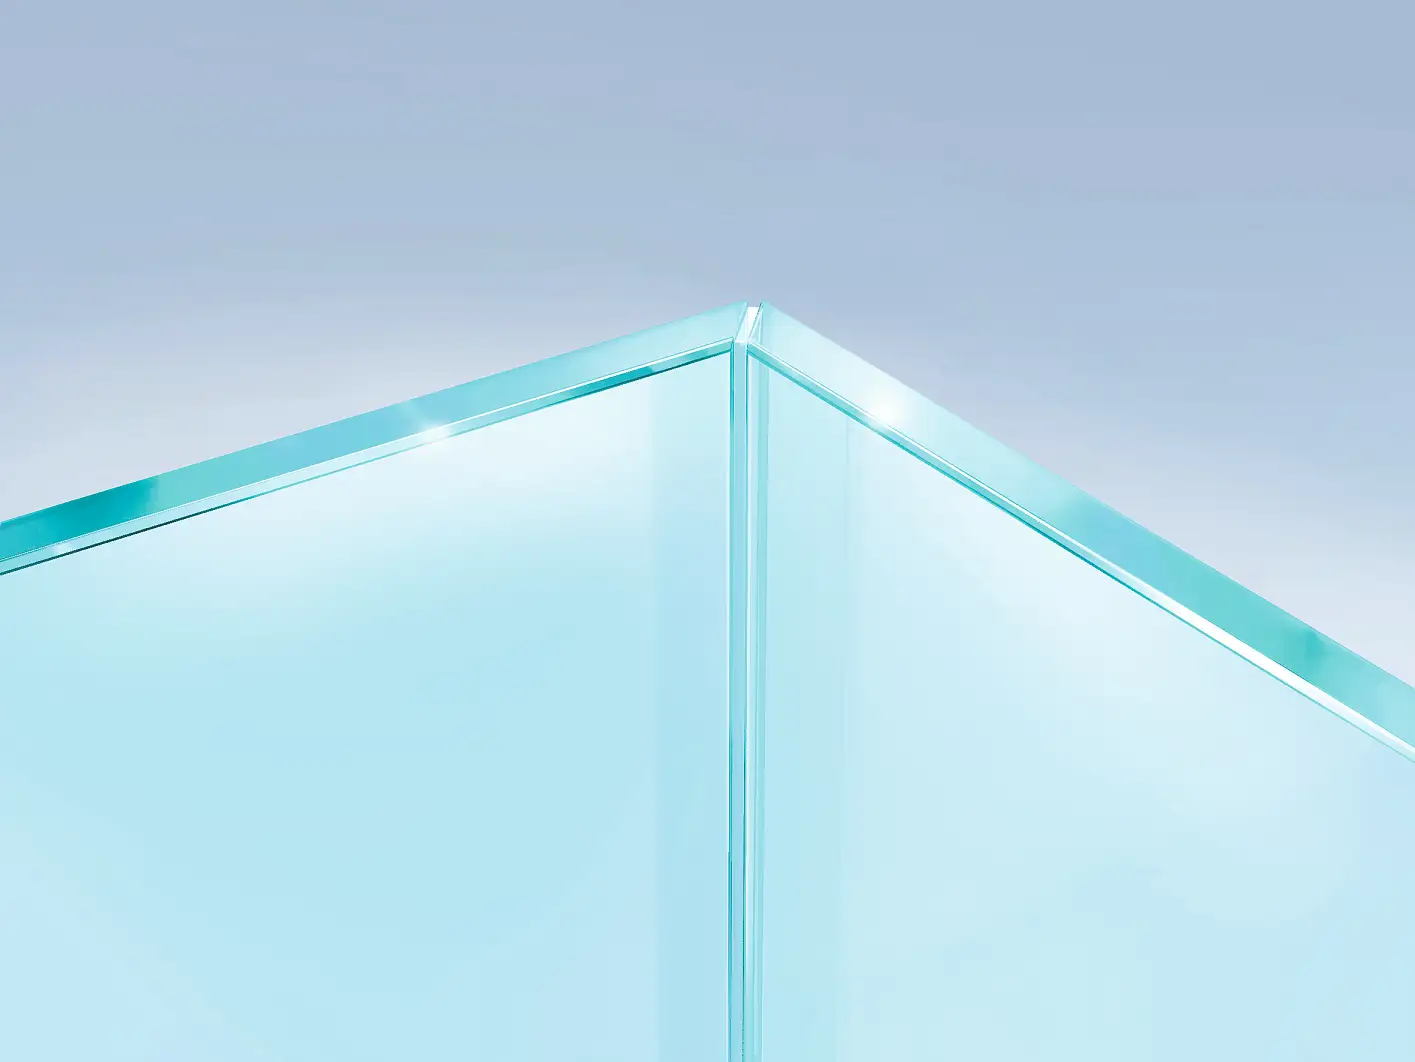 Bonding glass panels with a 45° angle in order to have an invisible and optically clear corner